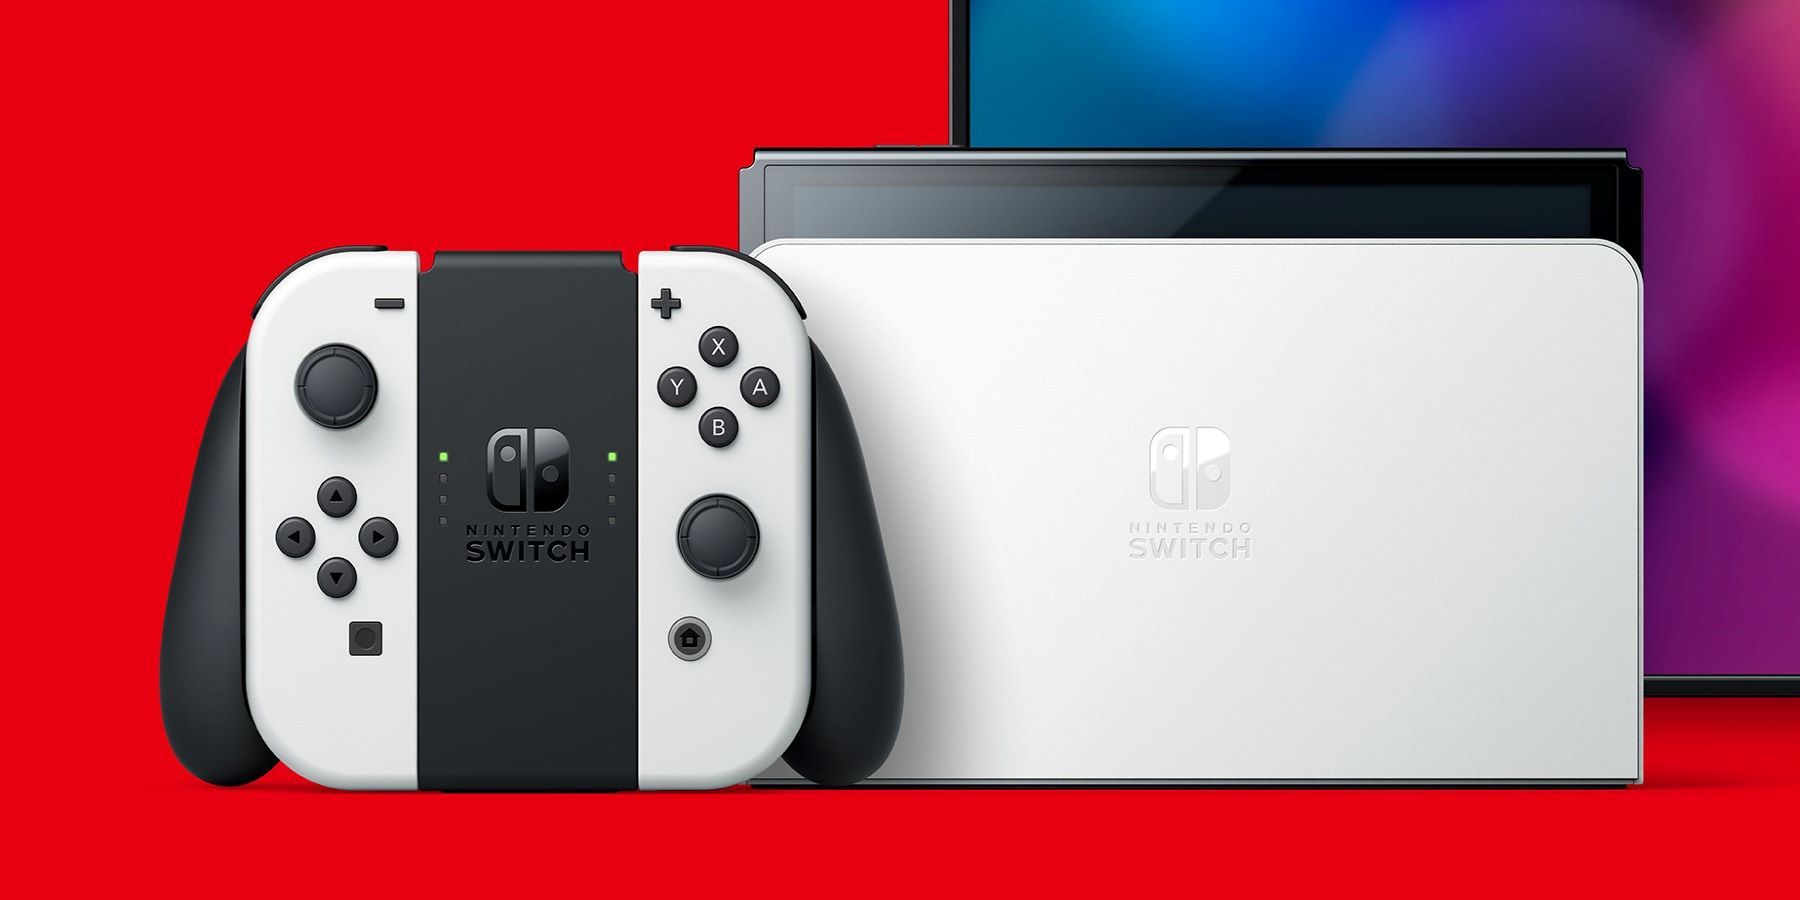 The Next Nintendo Switch Model Needs One Major New Feature